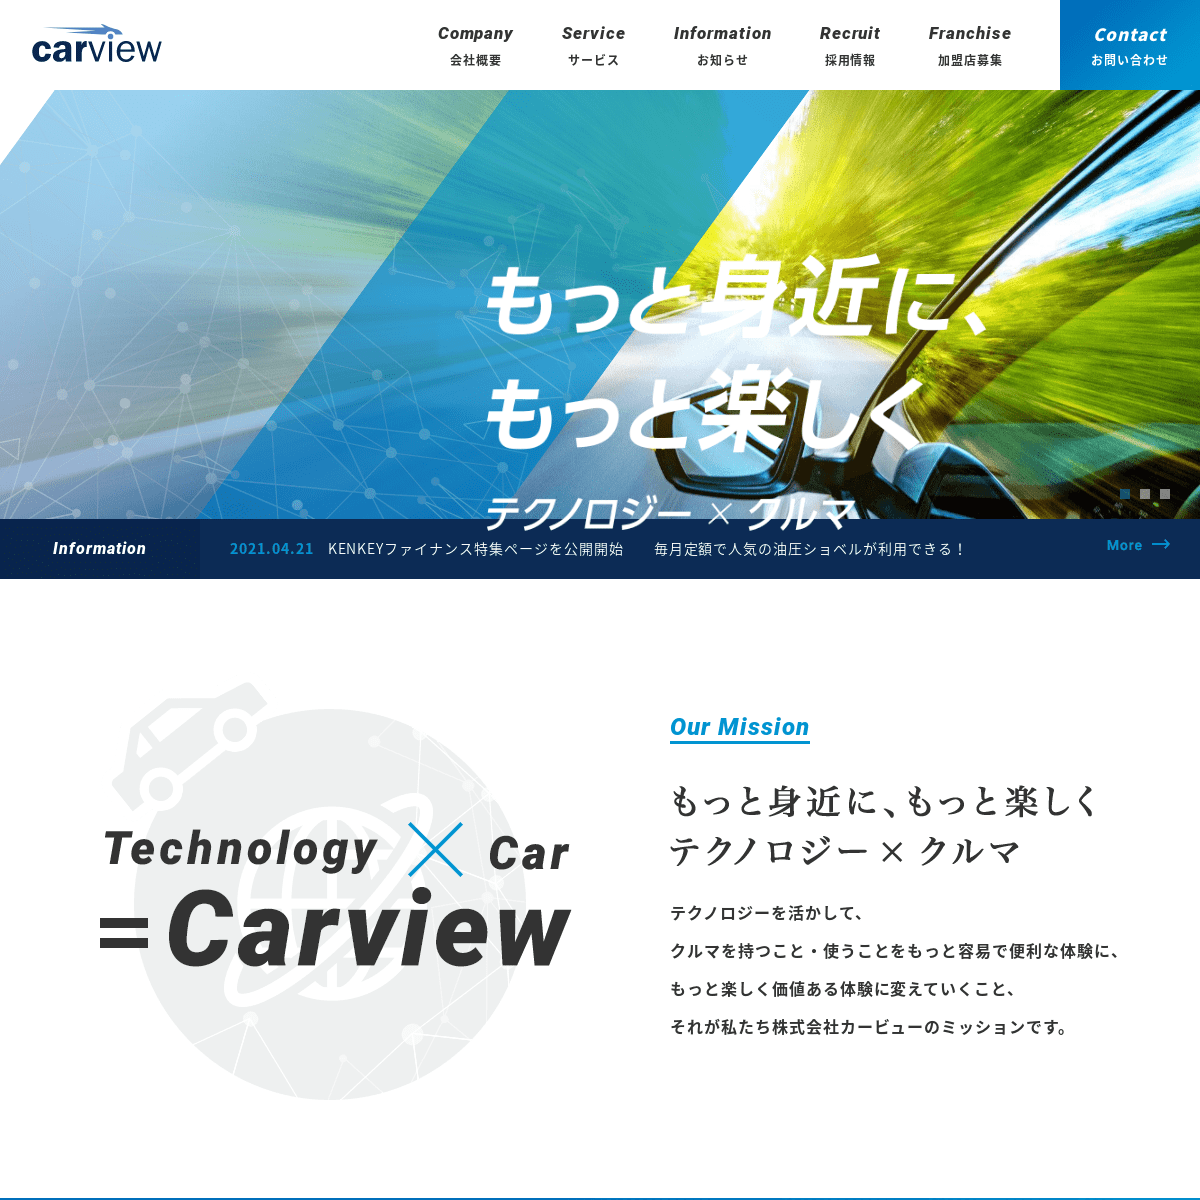 A complete backup of https://carview.co.jp